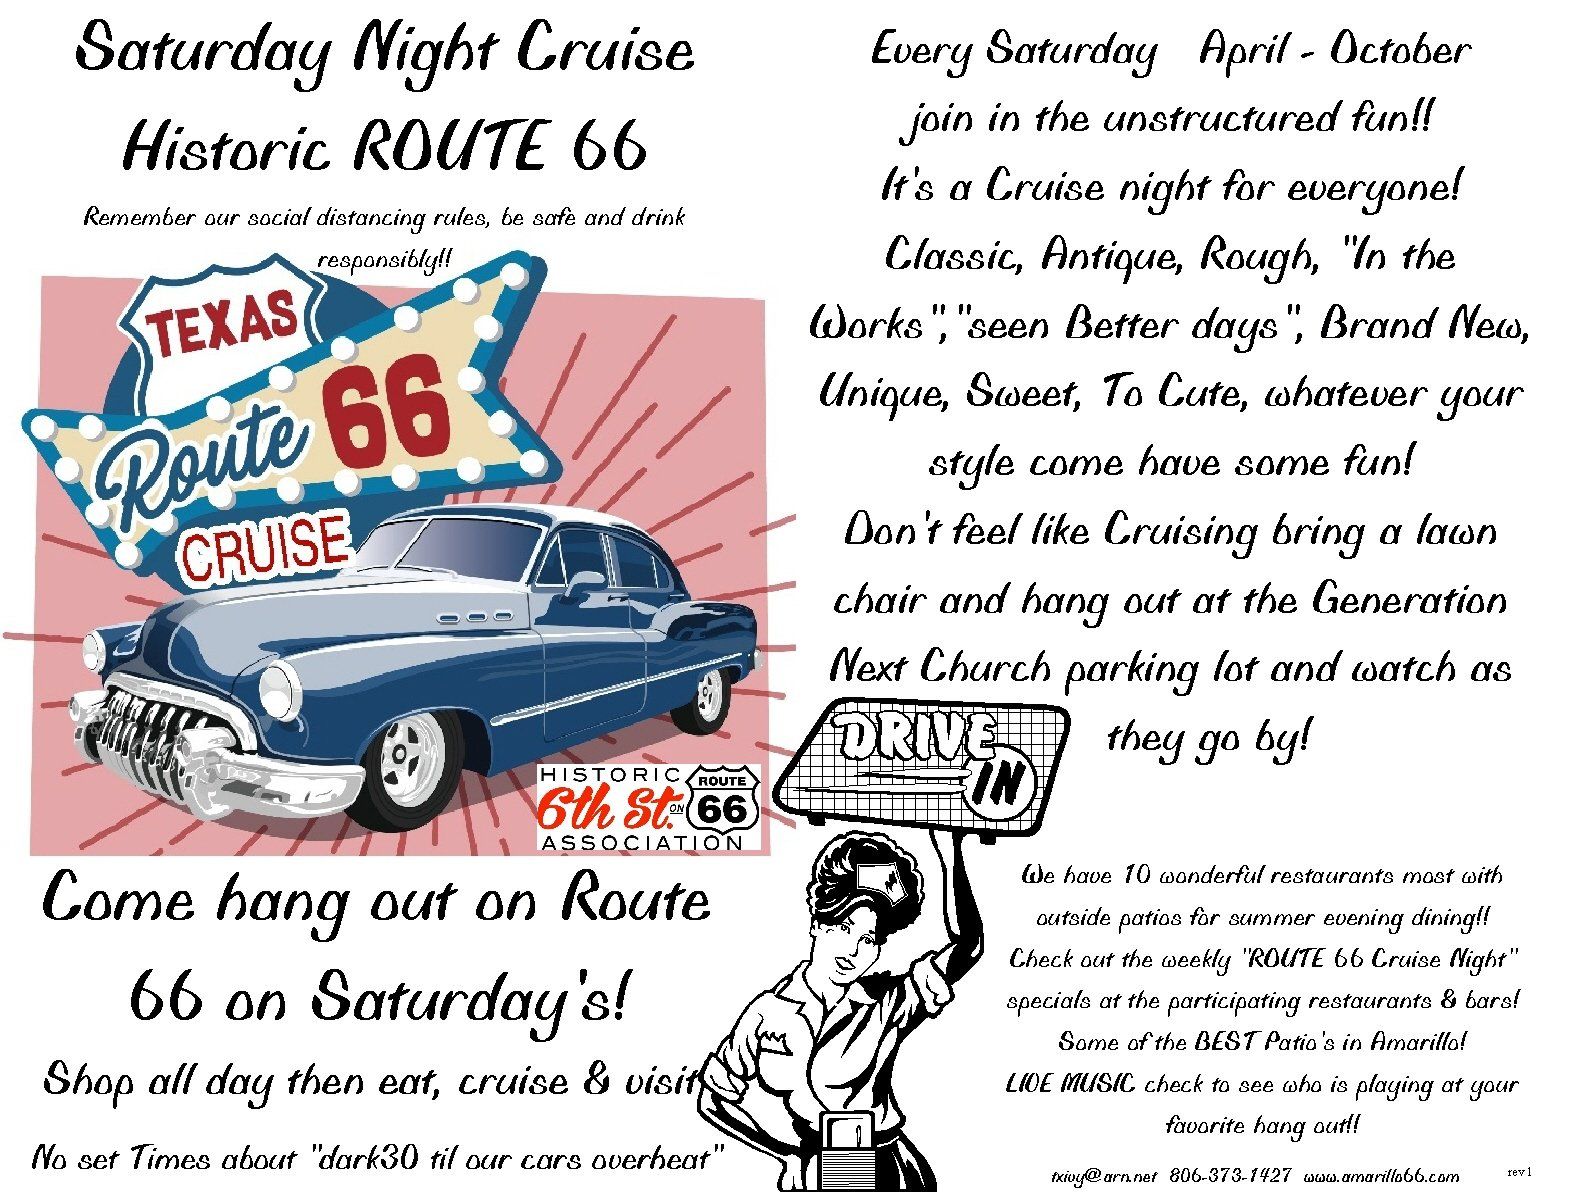 Historic 6th on Rt. 66 Cruise Night every Saturday starting April 3rd